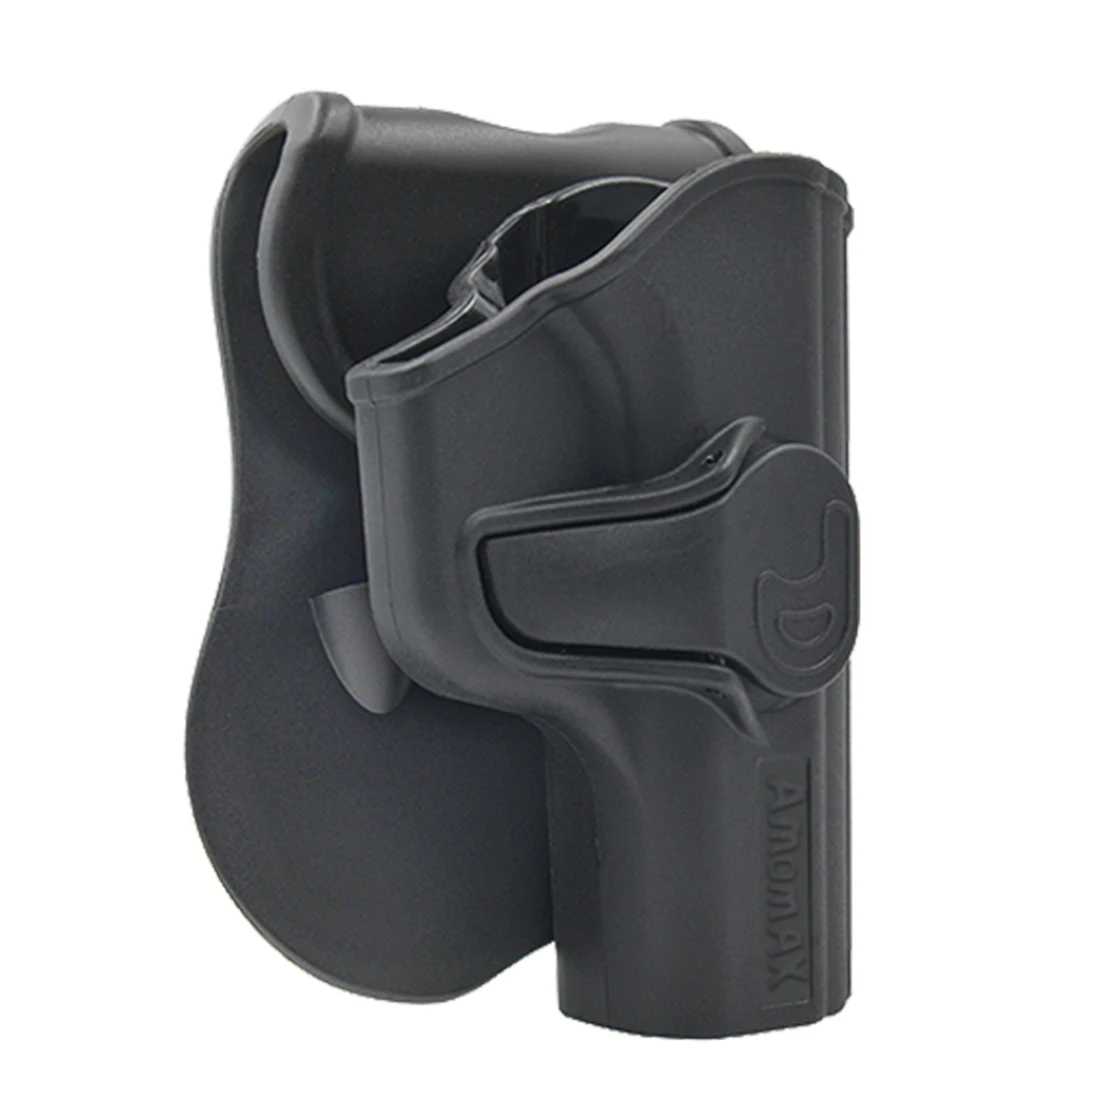 Amomax Adjustable Tactical Holster for Makarov PM - Right-handed Black(Standard only with waist plate, no other accessories)